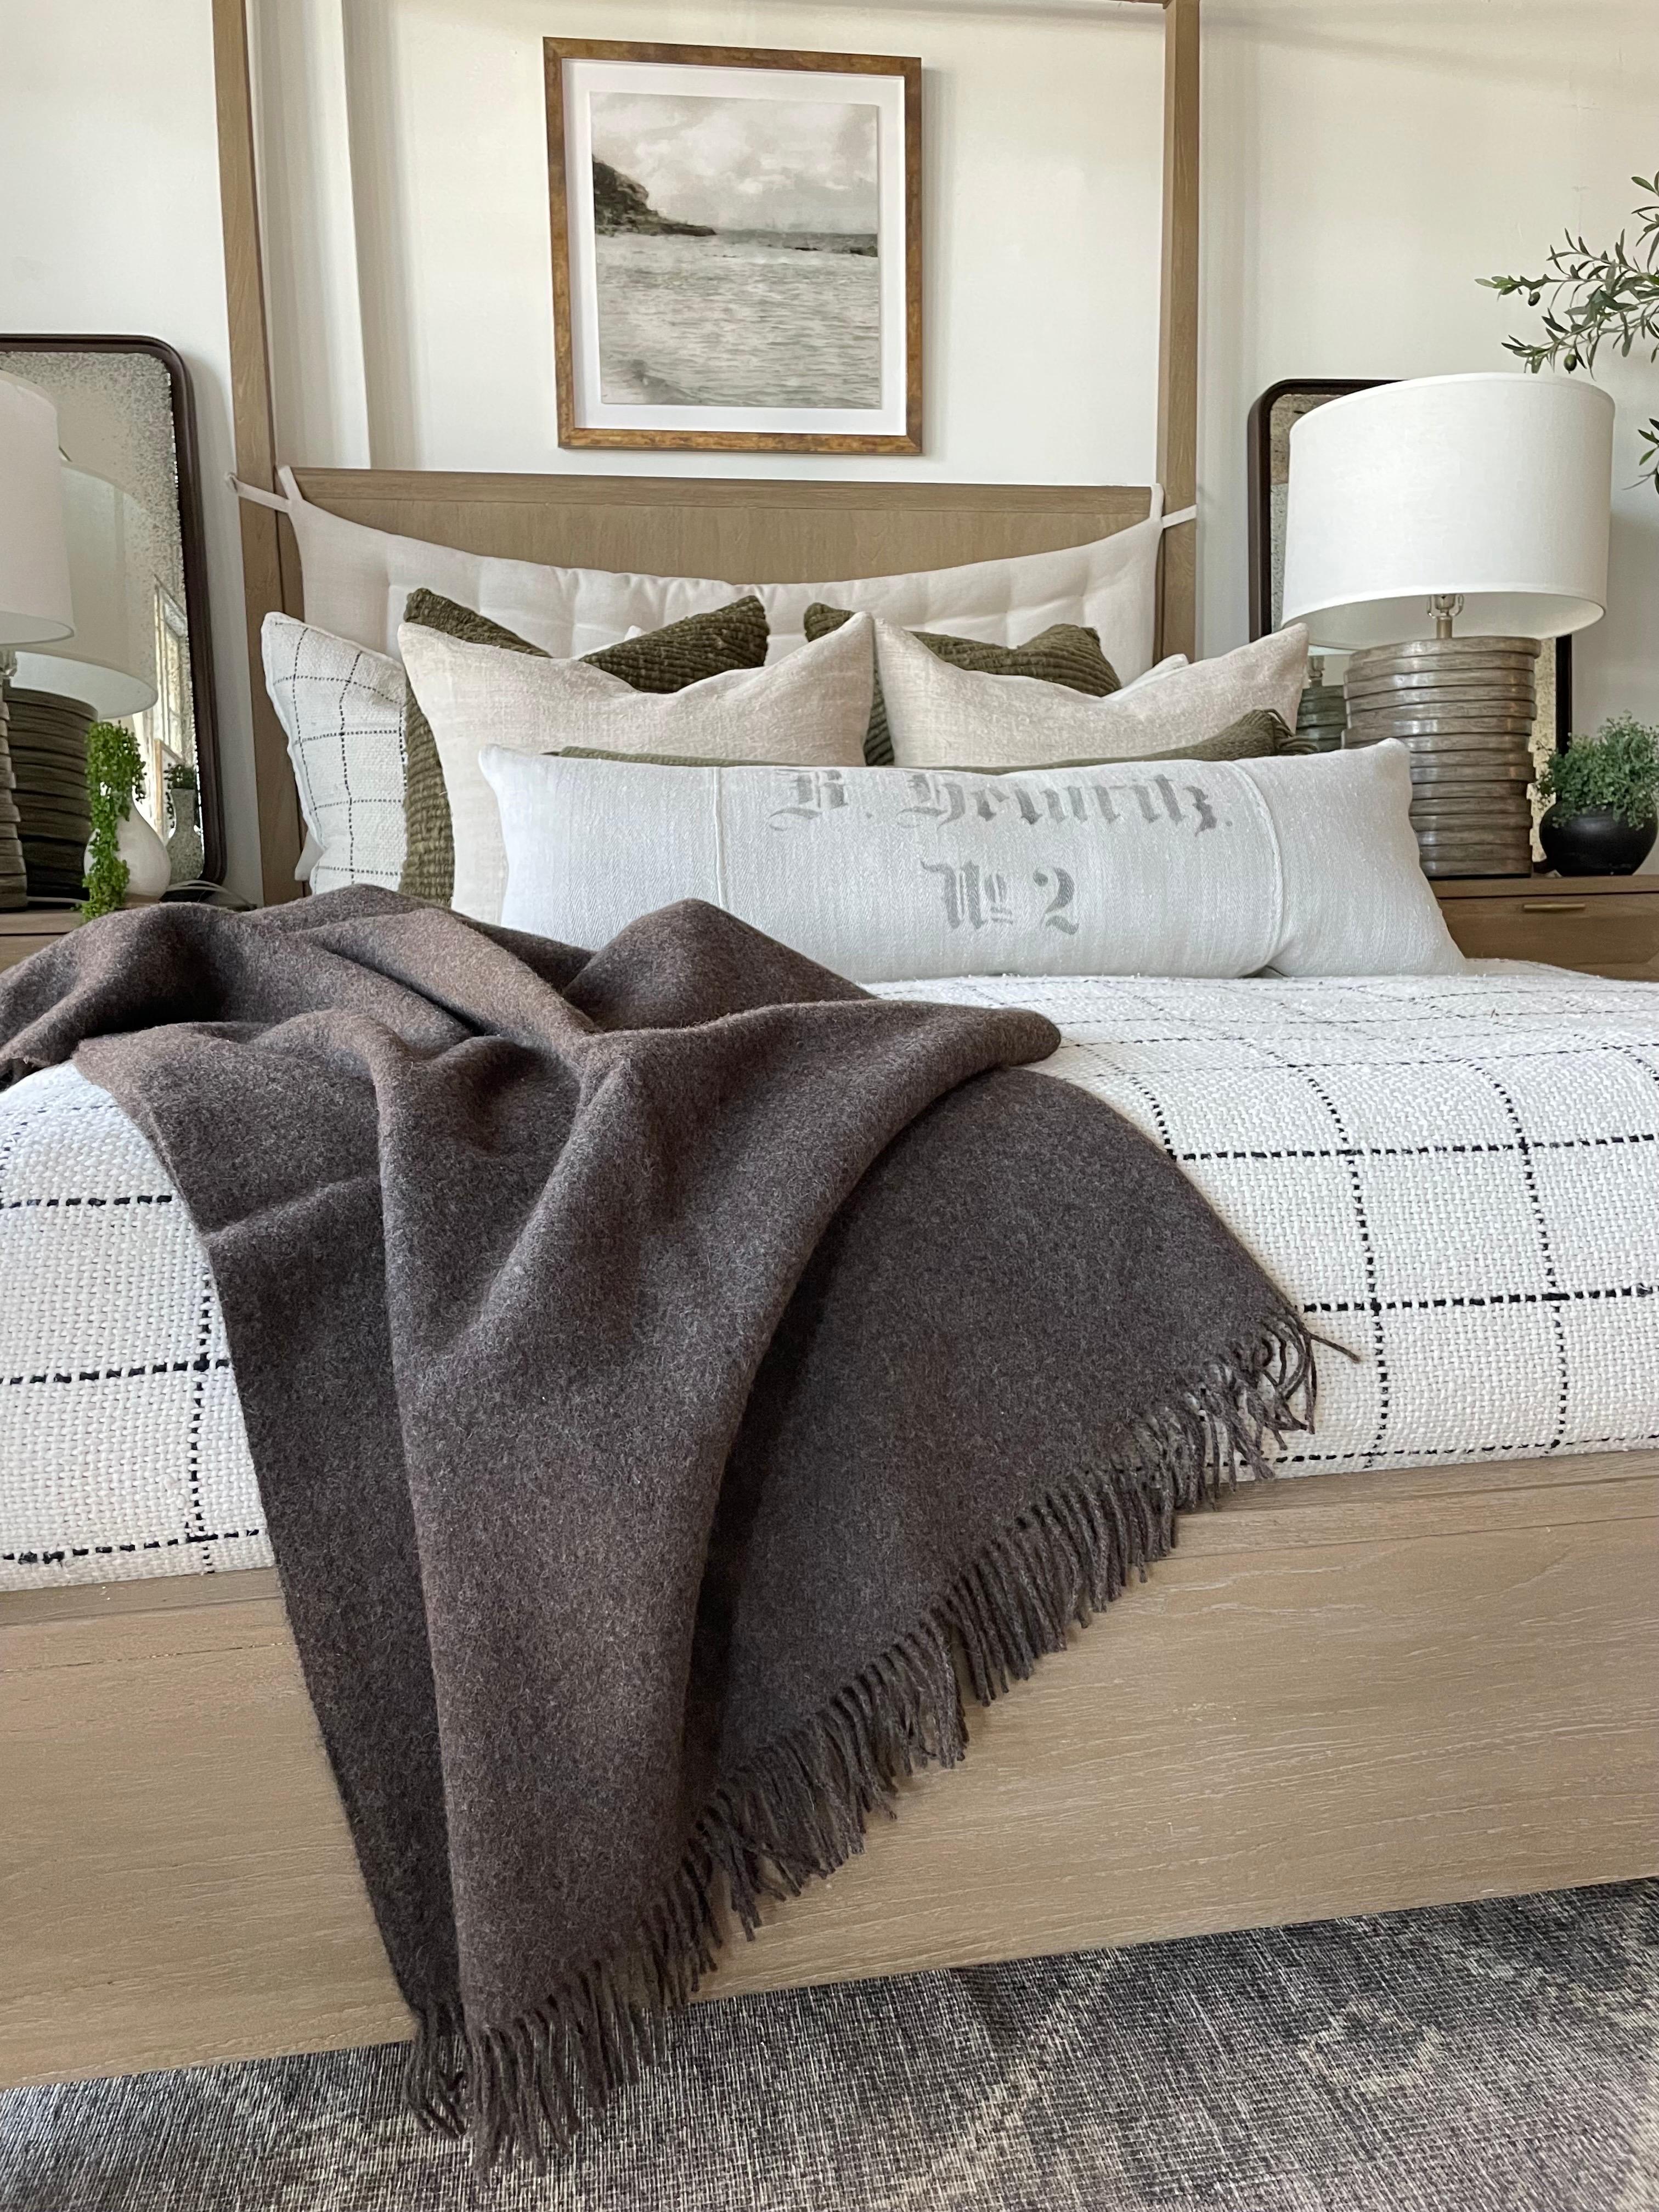 Fall in love with our enchanting Julia throw made of alpaca wool and genuine sheepskin wool. The quality is 100% natural, which is why you will experience an extreme softness both in its looks and when you feel the beautiful throw. An exclusive